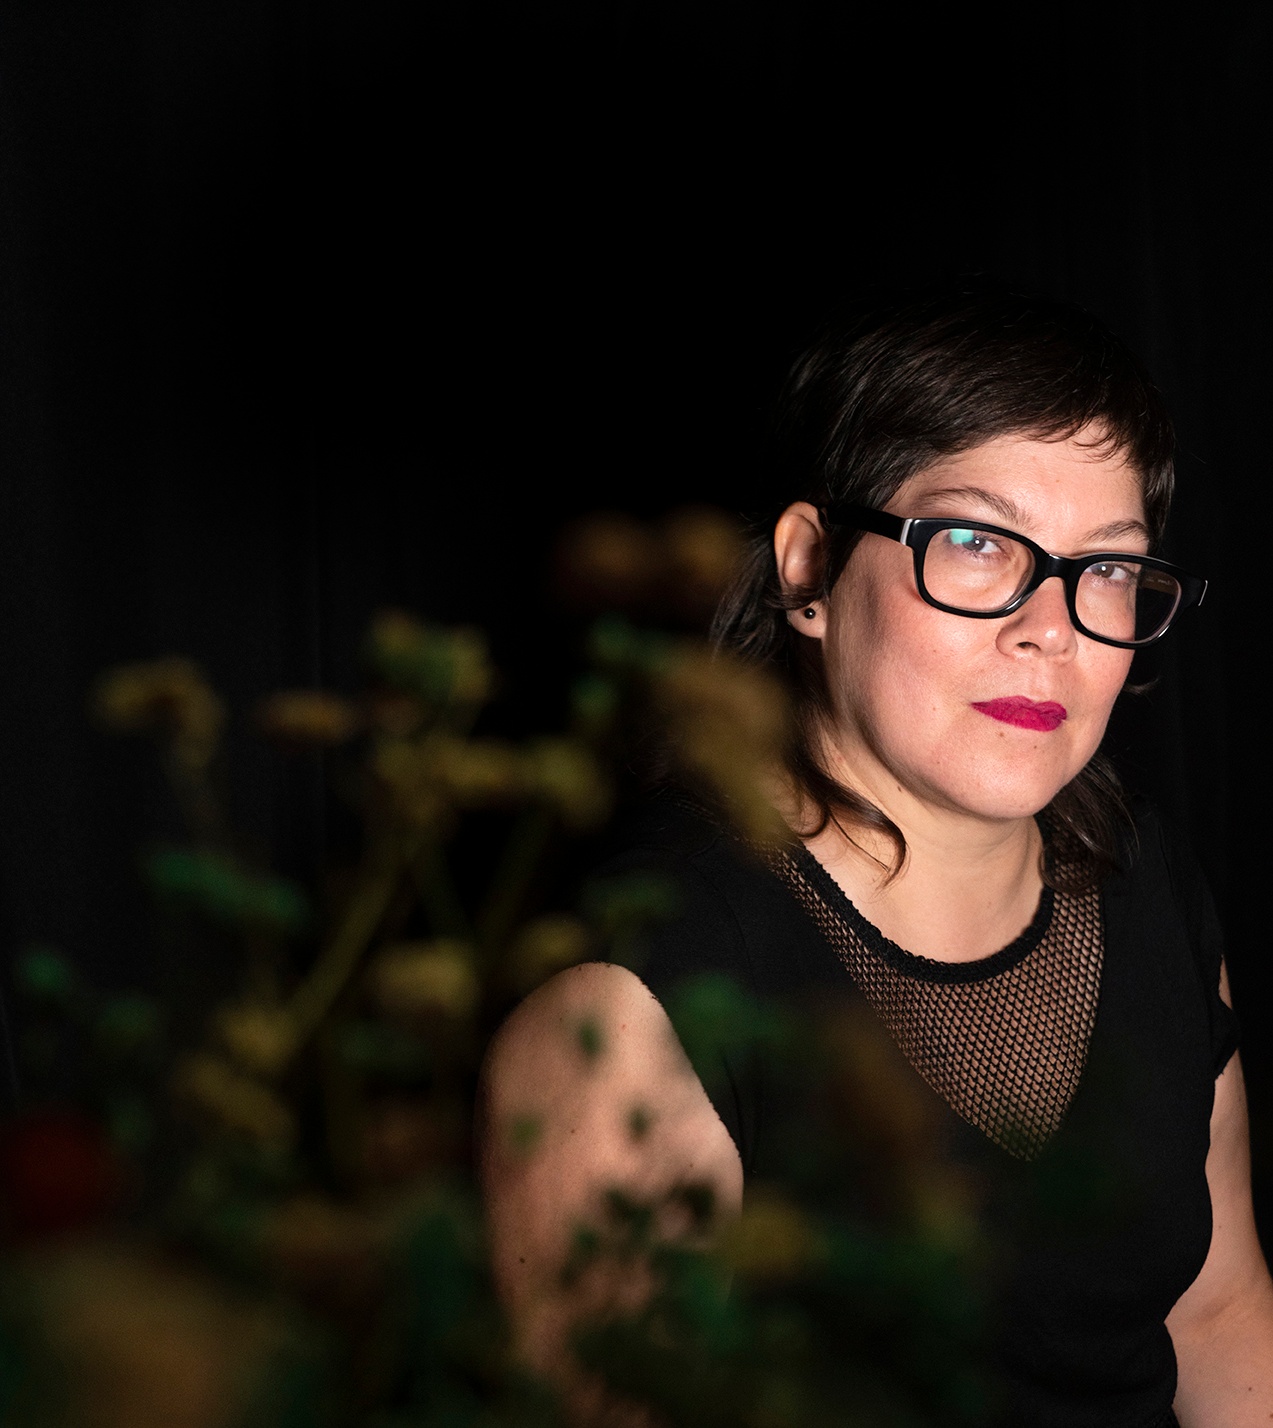 A woman seen through a branch with green leaves that is blurry in the foreground. She has brown hair and wears rectangular glasses, and is well lit by a light shining directly on her with the background in deep shadow.